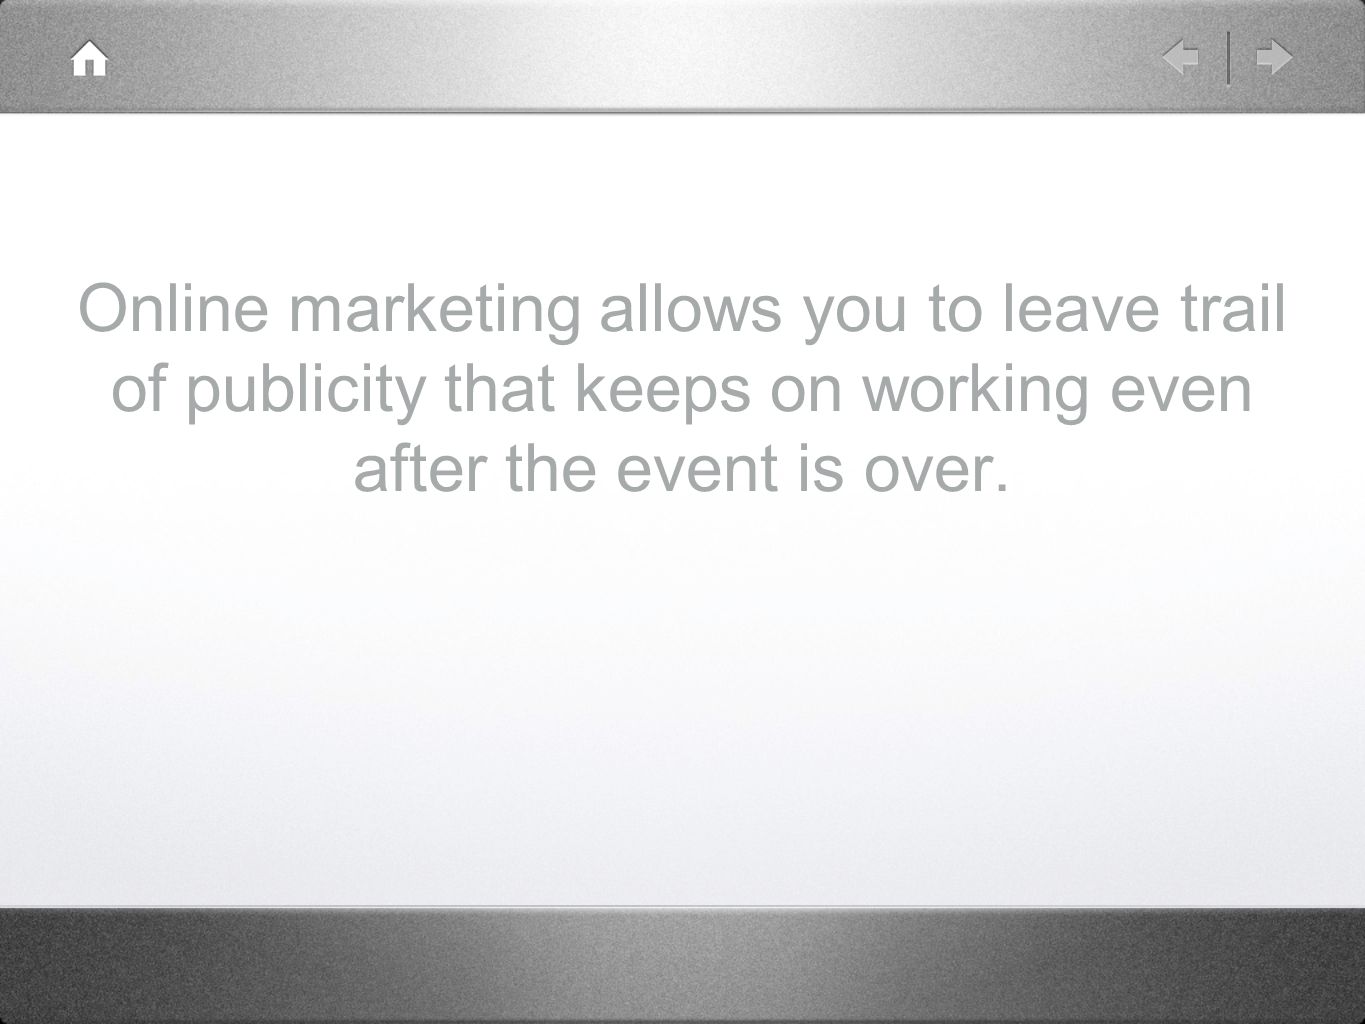 Online marketing allows you to leave trail of publicity that keeps on working even after the event is over.